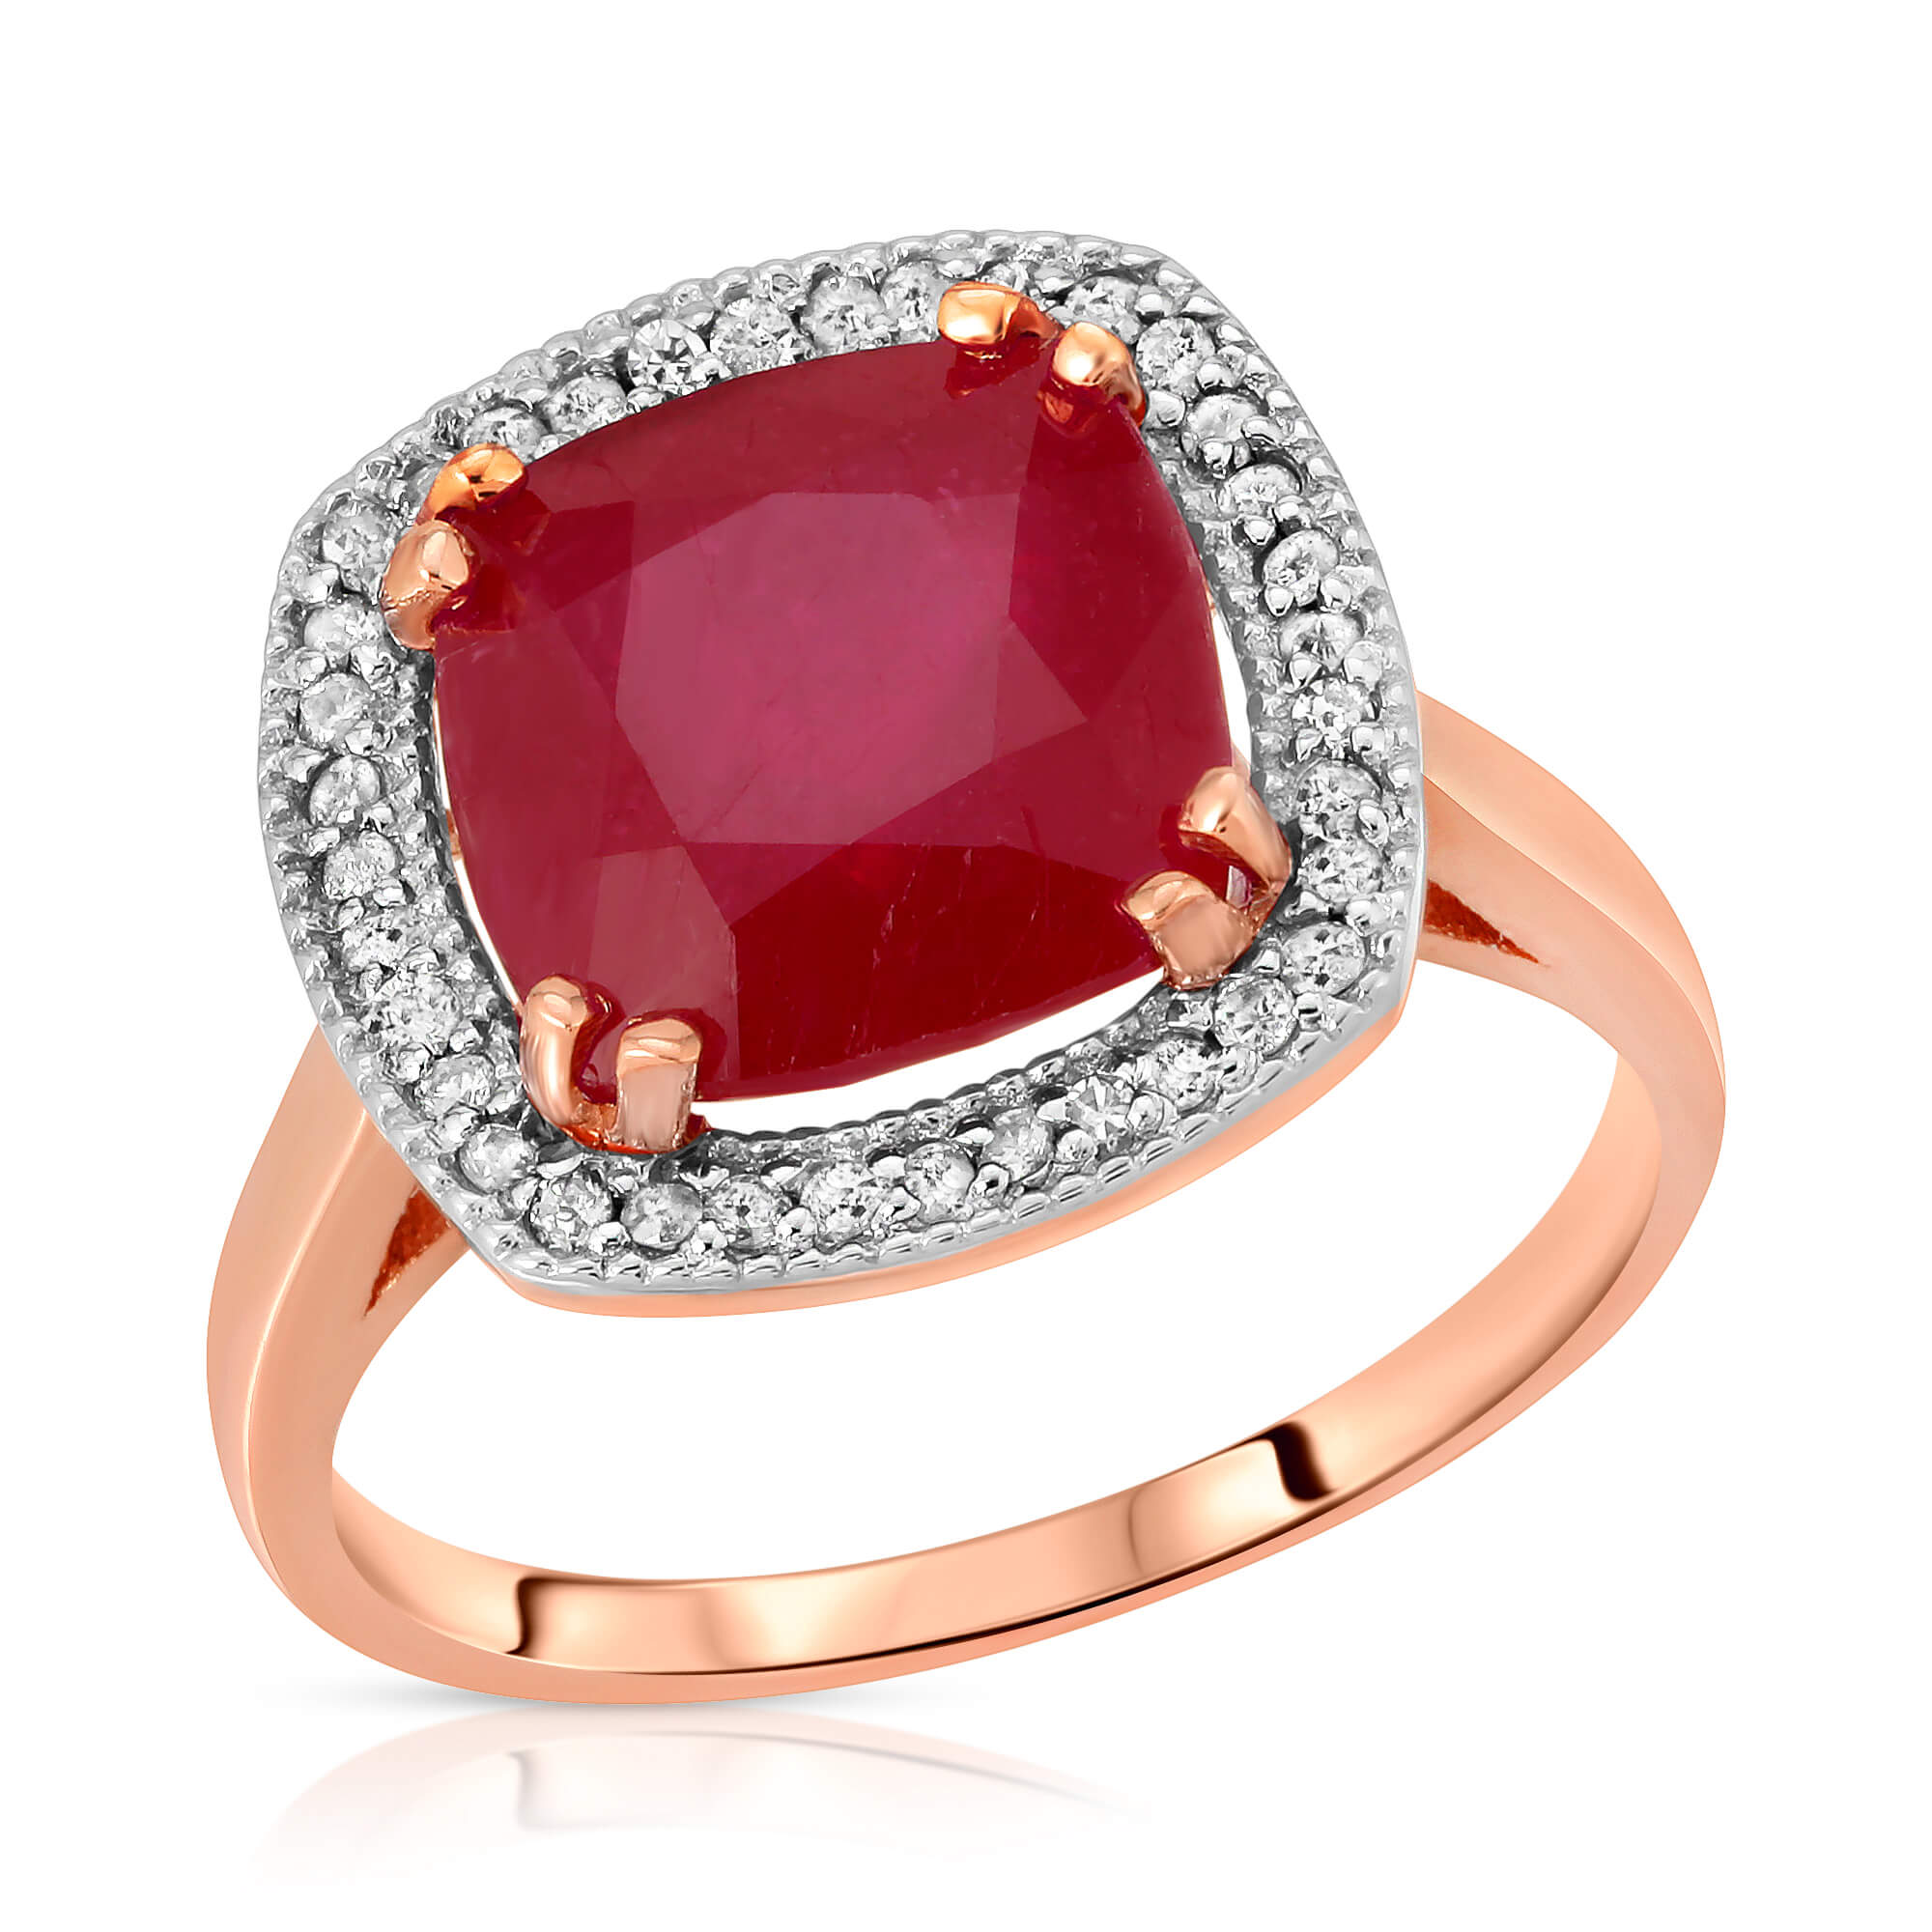 Cushion Cut Ruby Ring 6.9 ctw in 18ct Rose Gold